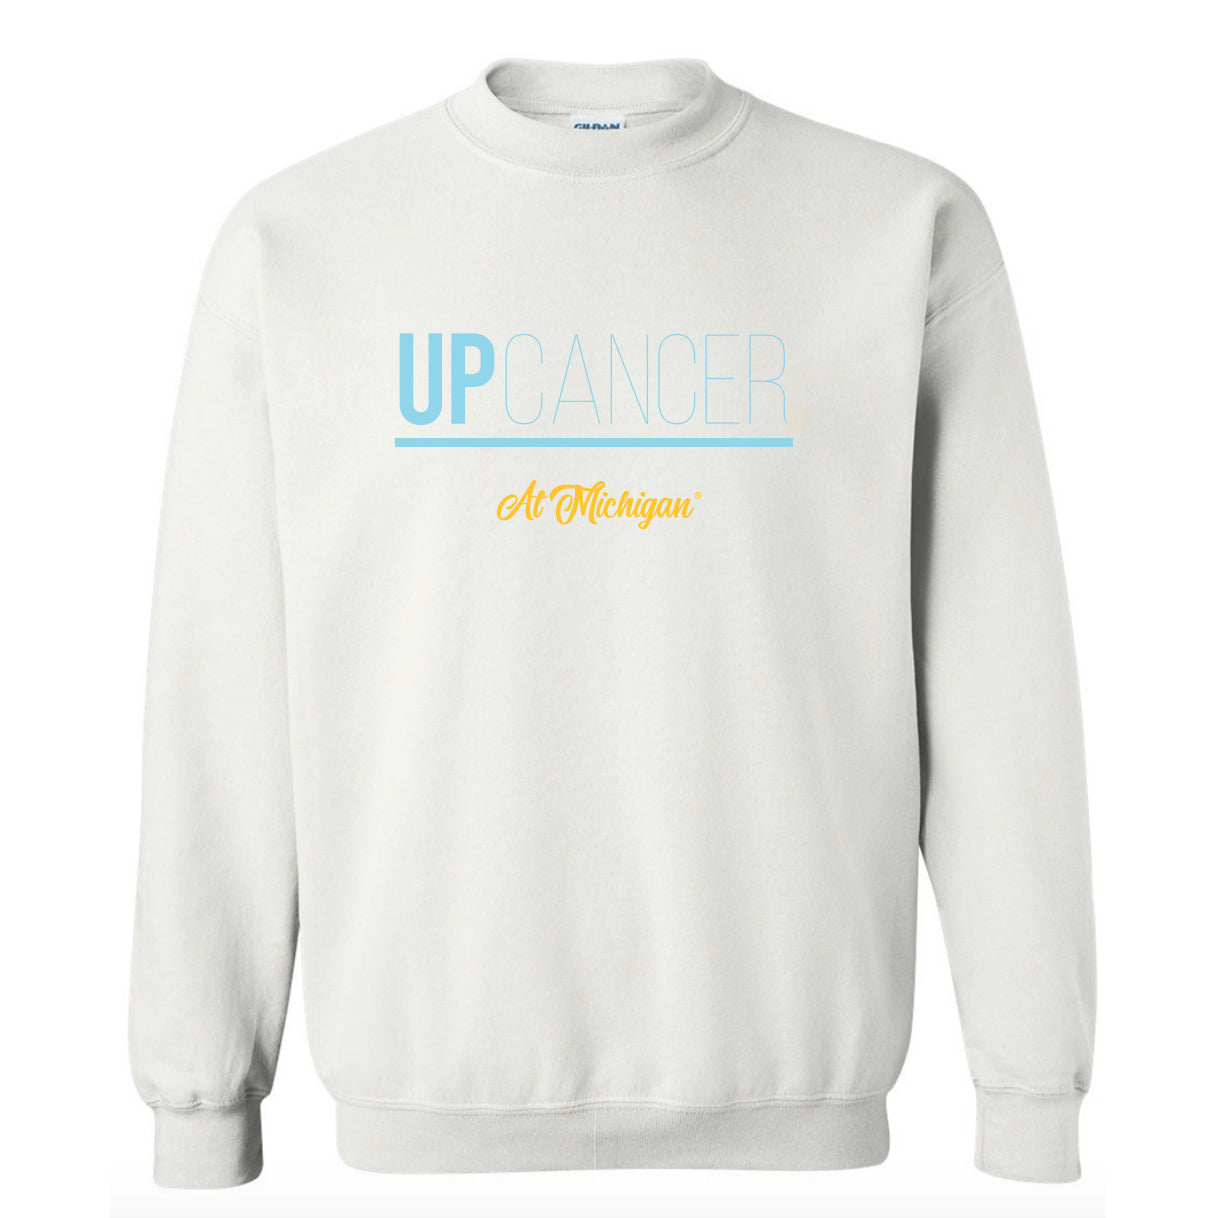 Up Cancer White Crew (Listing ID: 6582553903173)